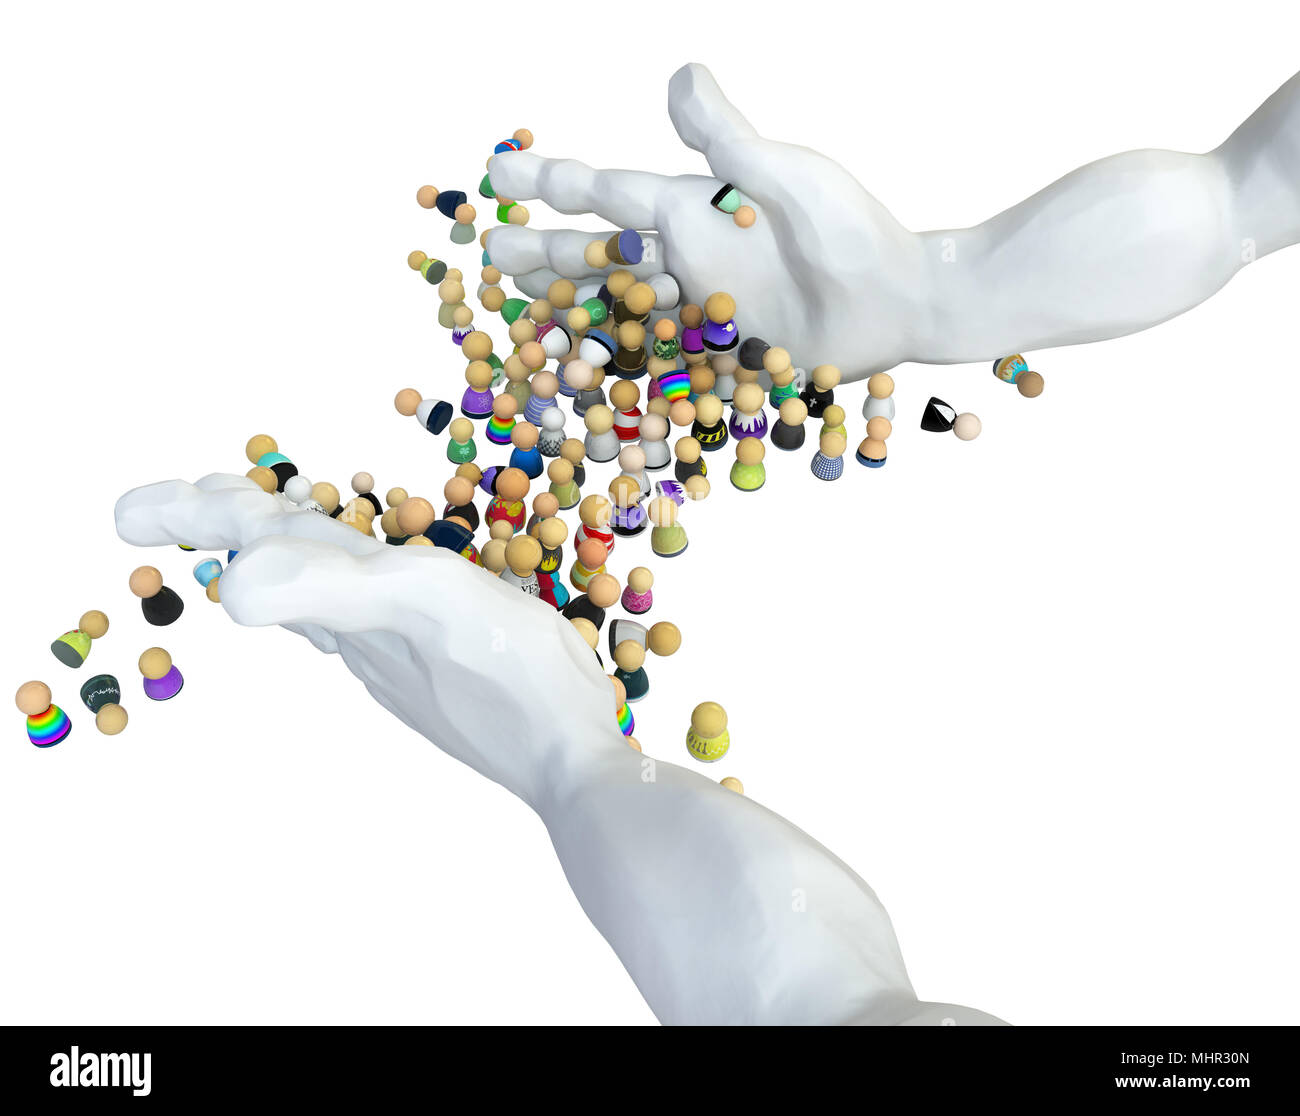 Crowd of small symbolic 3d figures, over white, isolated Stock Photo